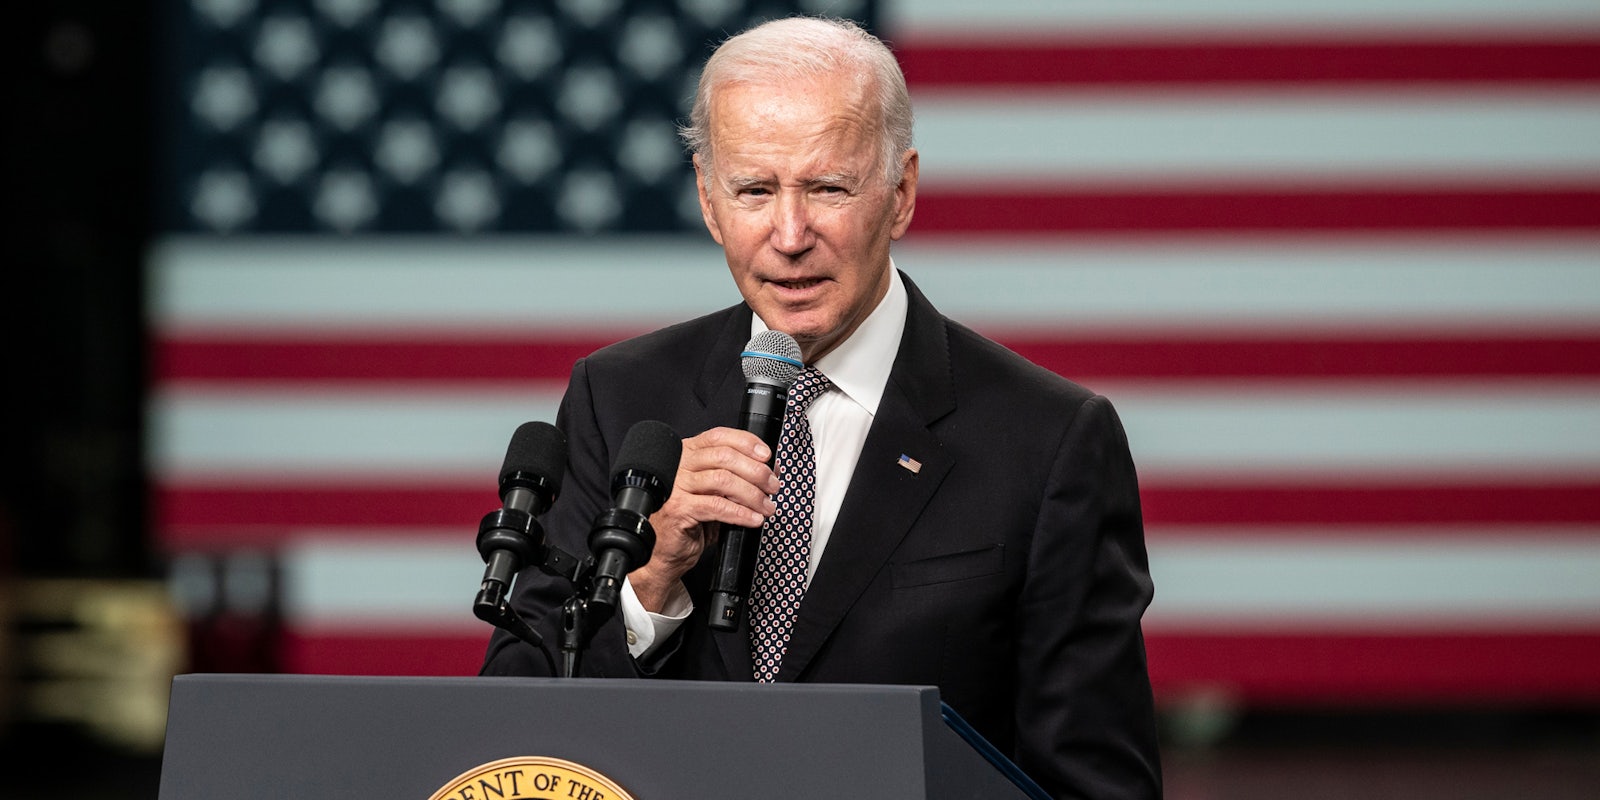 Joe Biden speaking into microphone at podium in front of American flag